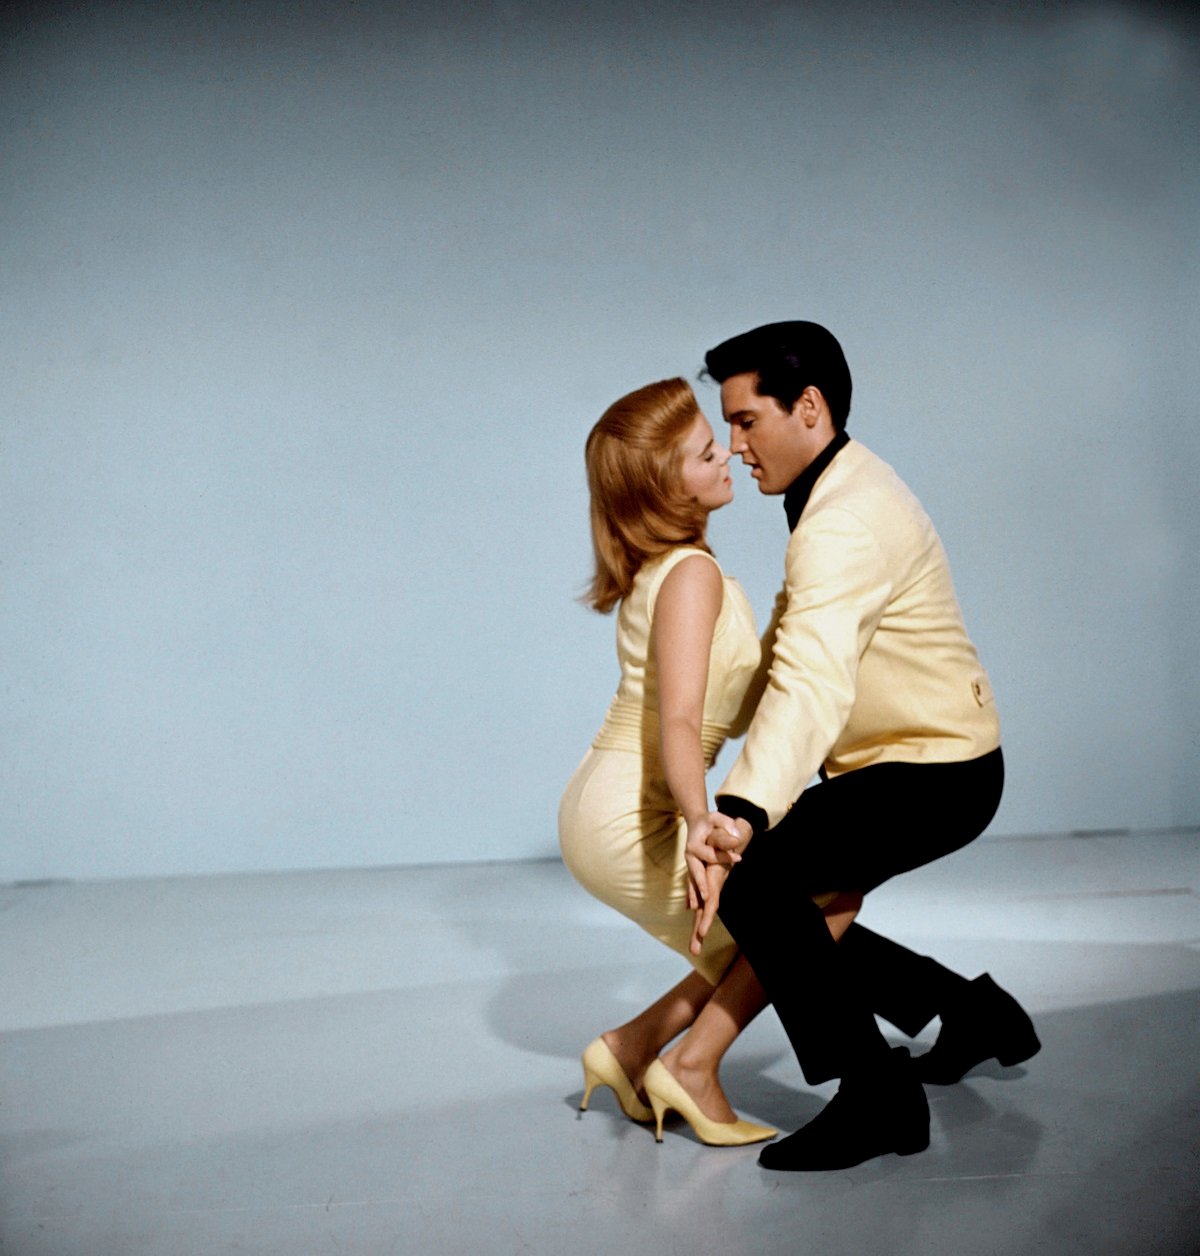 Ann-Margret and American singer, actor and icon Elvis Presley promoting the movie Viva Las Vegas, directed and produced by George Sidney. They are dancing in a promotional still.